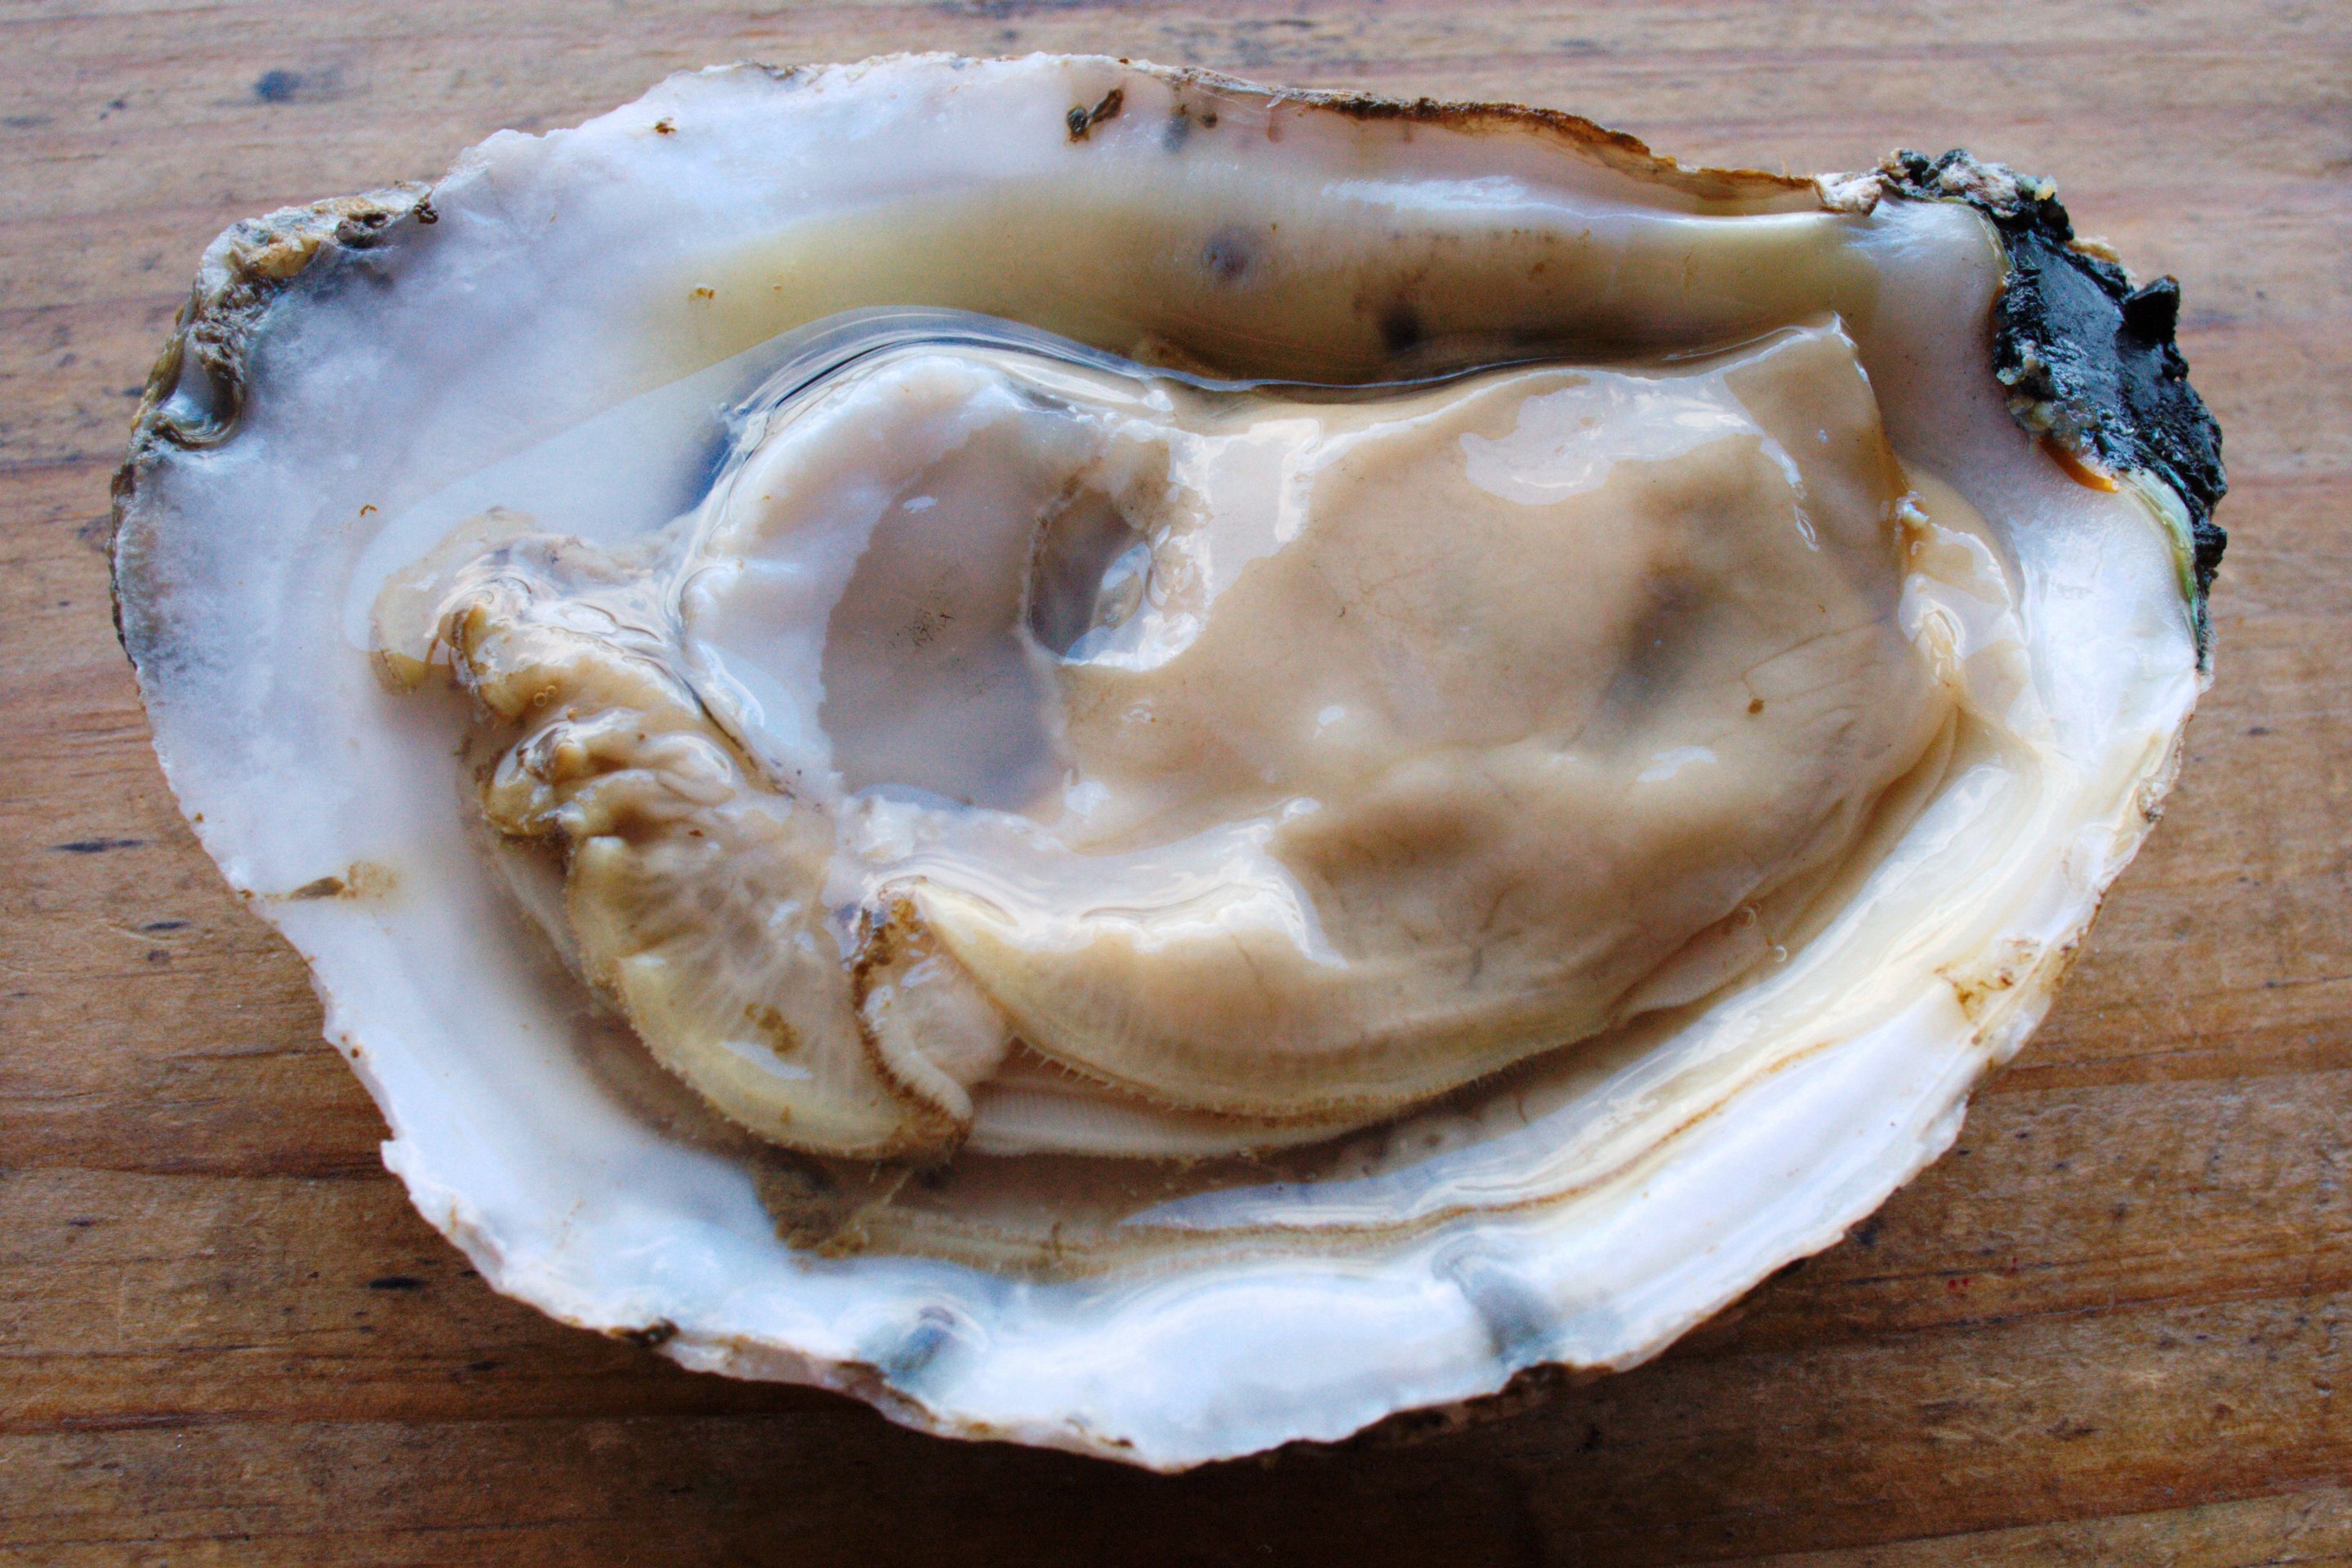 close up of a fresh, raw oyster from Apalachicola bay photographed by luxagraf